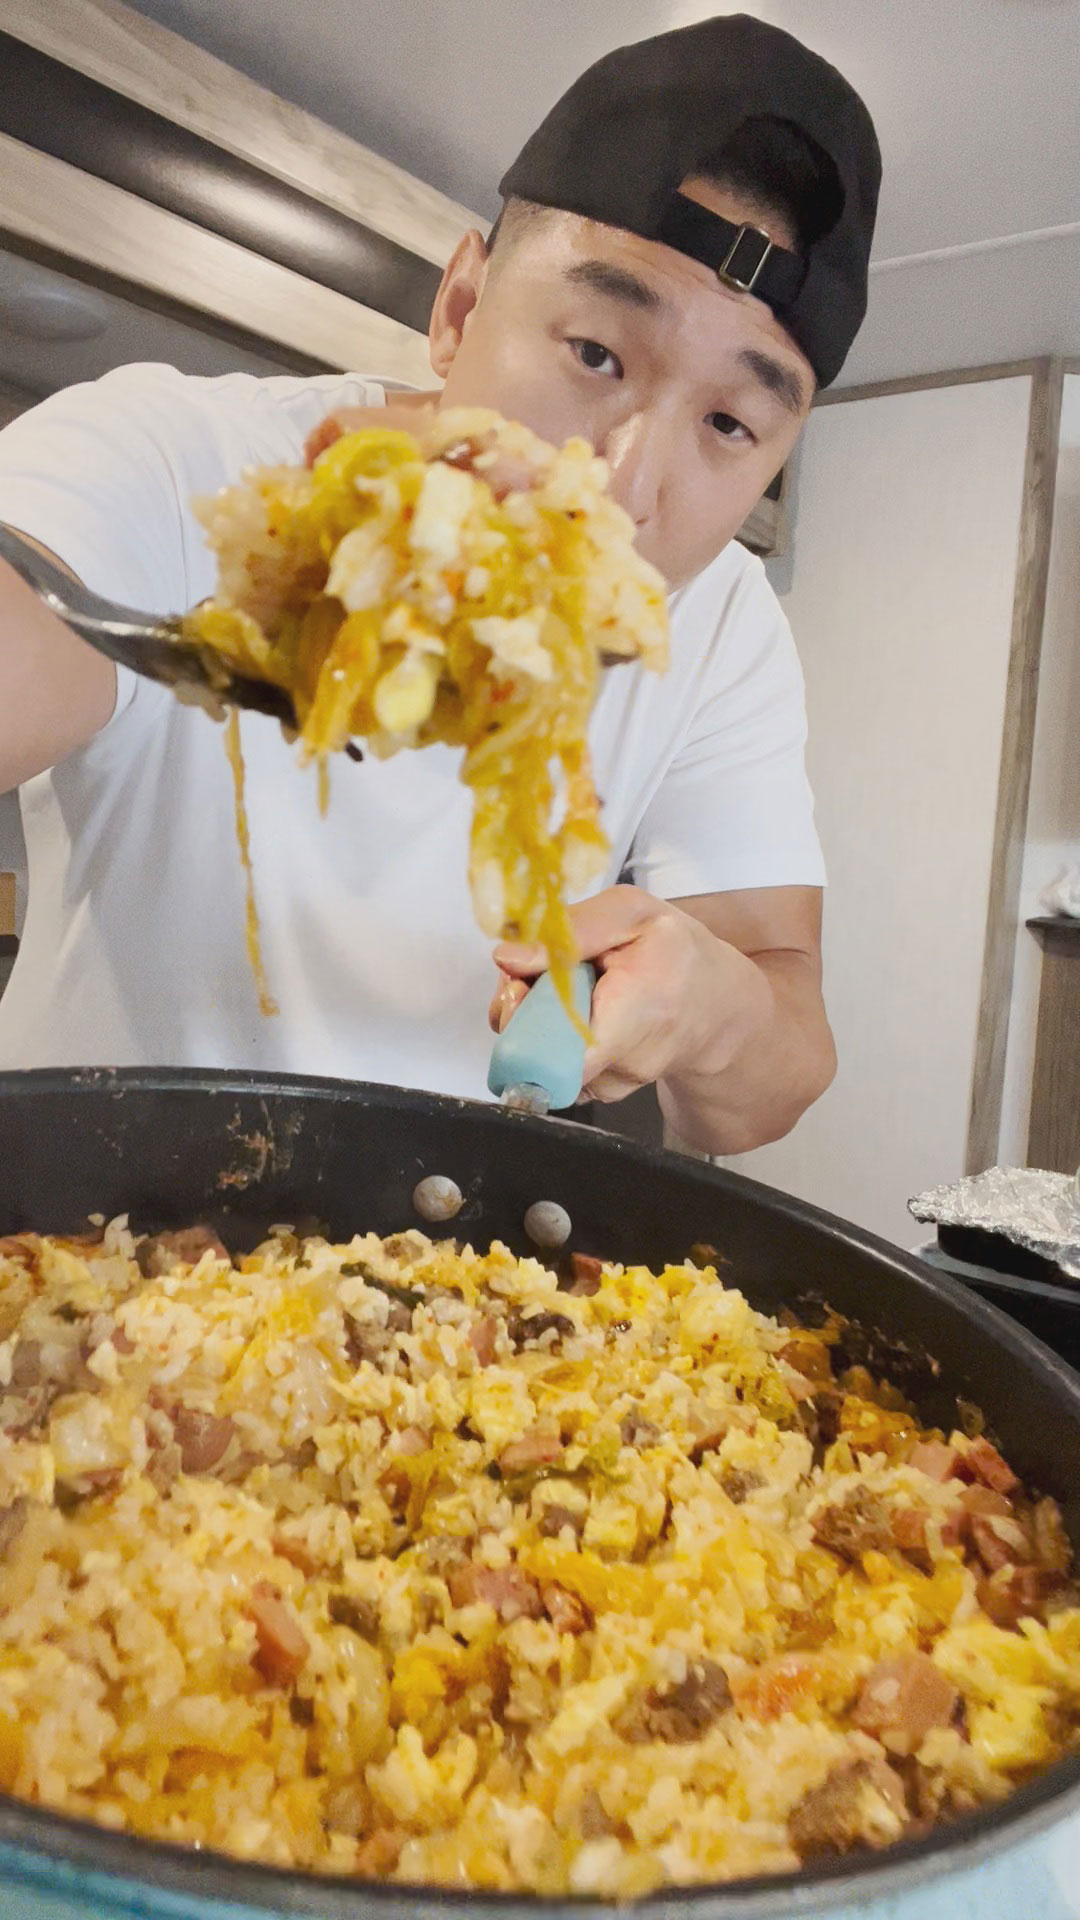 Chef Chris Cho holding a pan with leftover fried rice